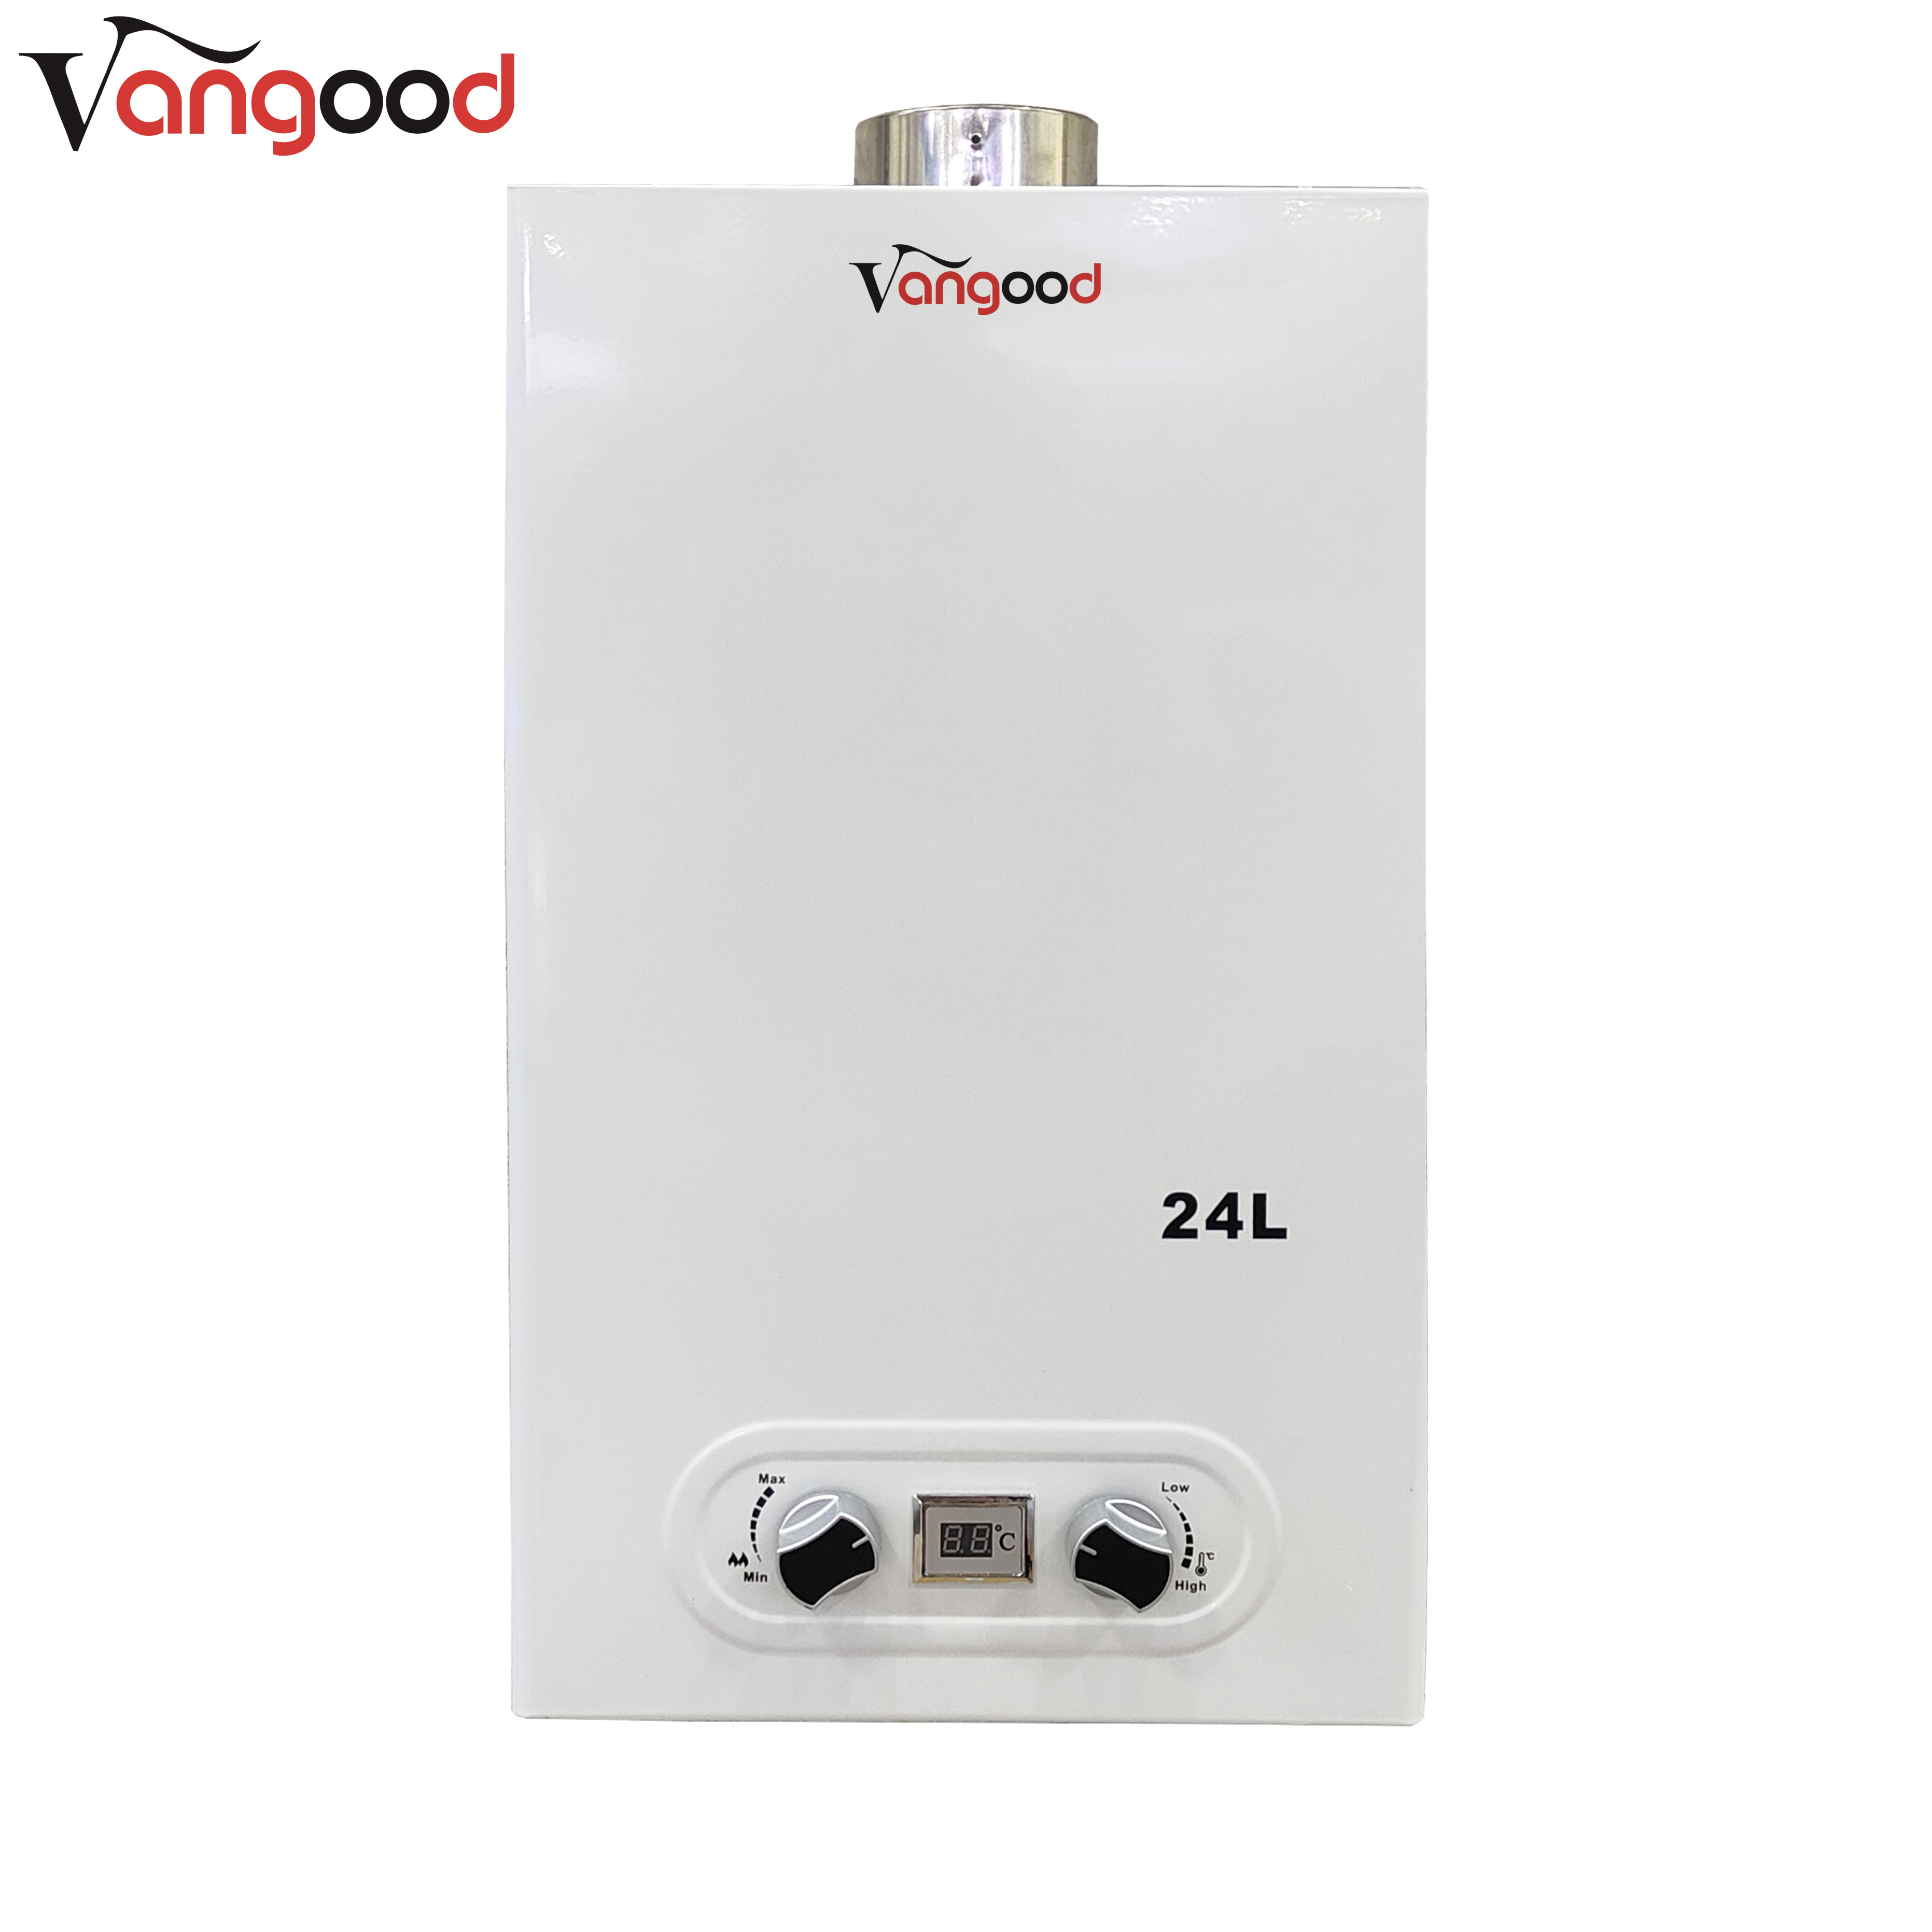 Gas Flow Activated Tankless Water Heater with Digital Display